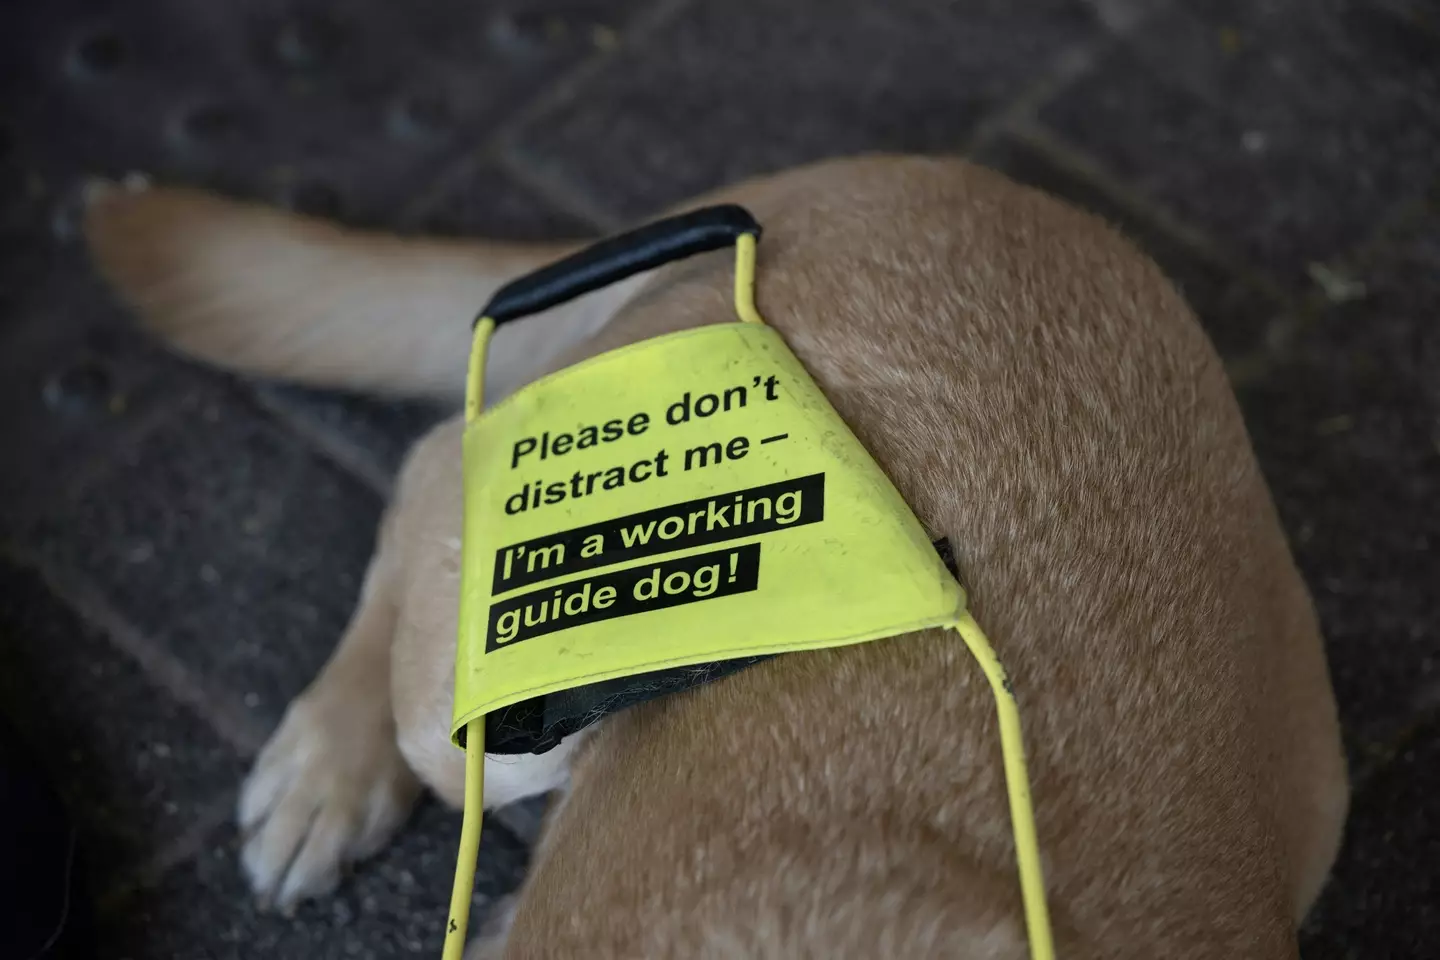 By law, guide dogs should be allowed into any taxi or private hire vehicle.